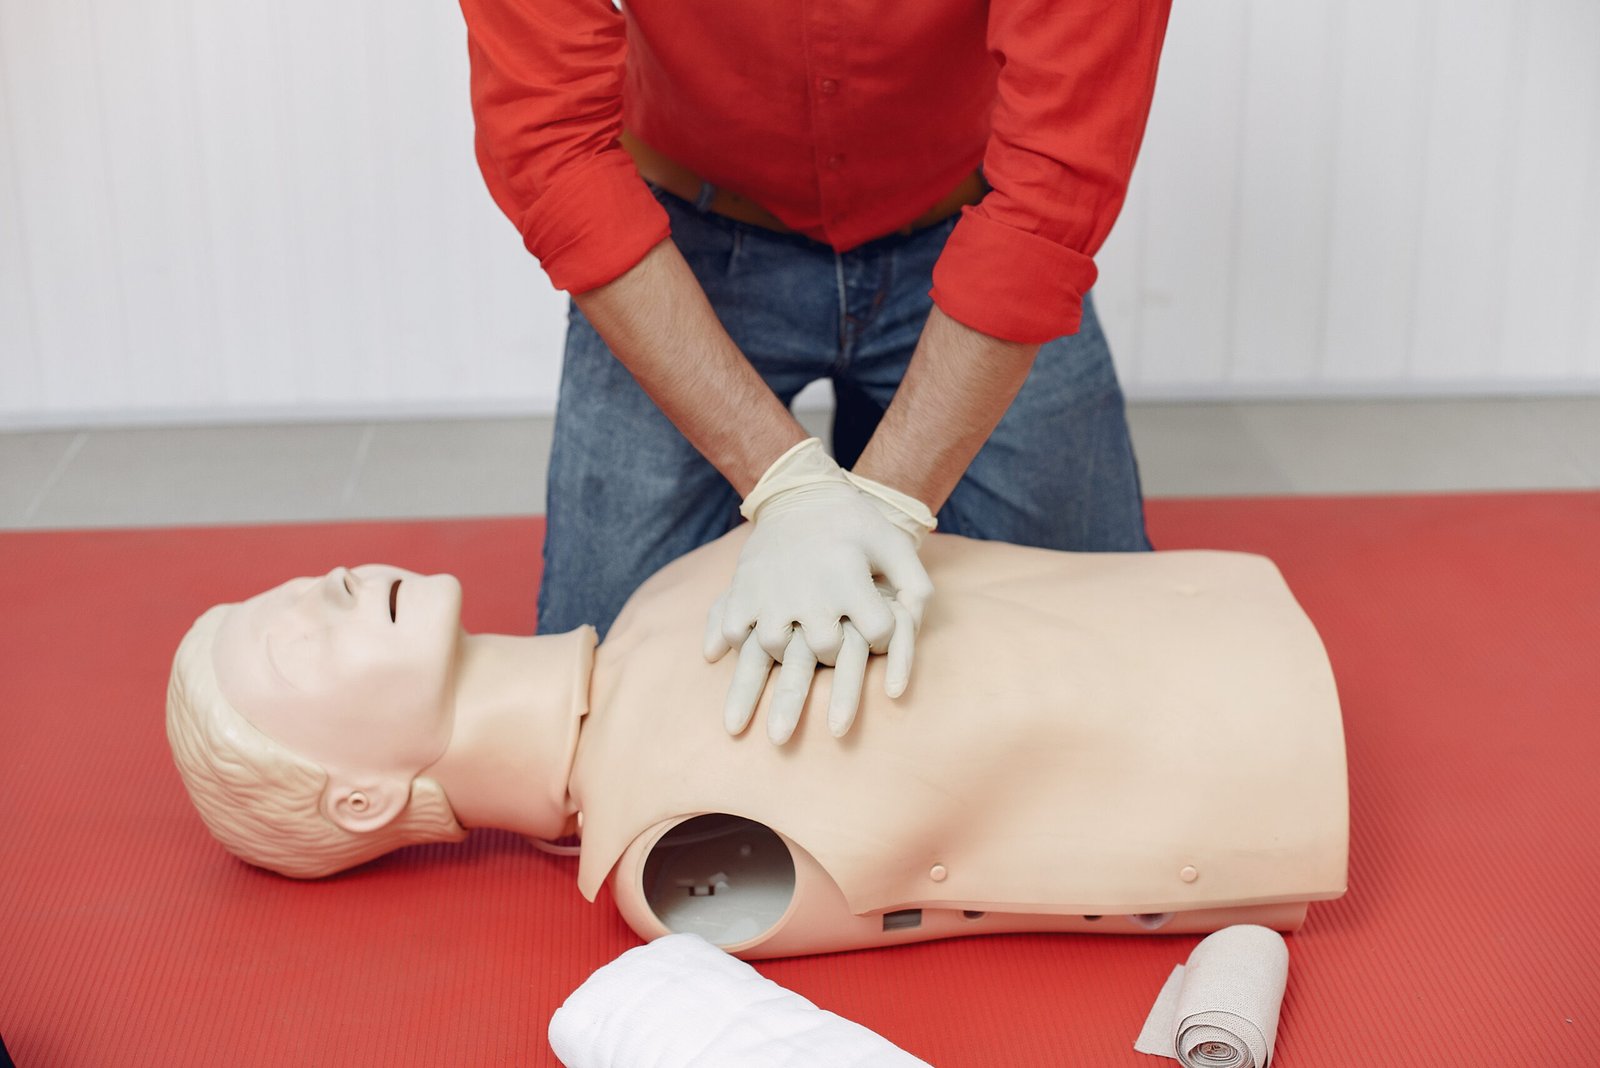 How to Perform Adult Choking First Aid: Essential Steps